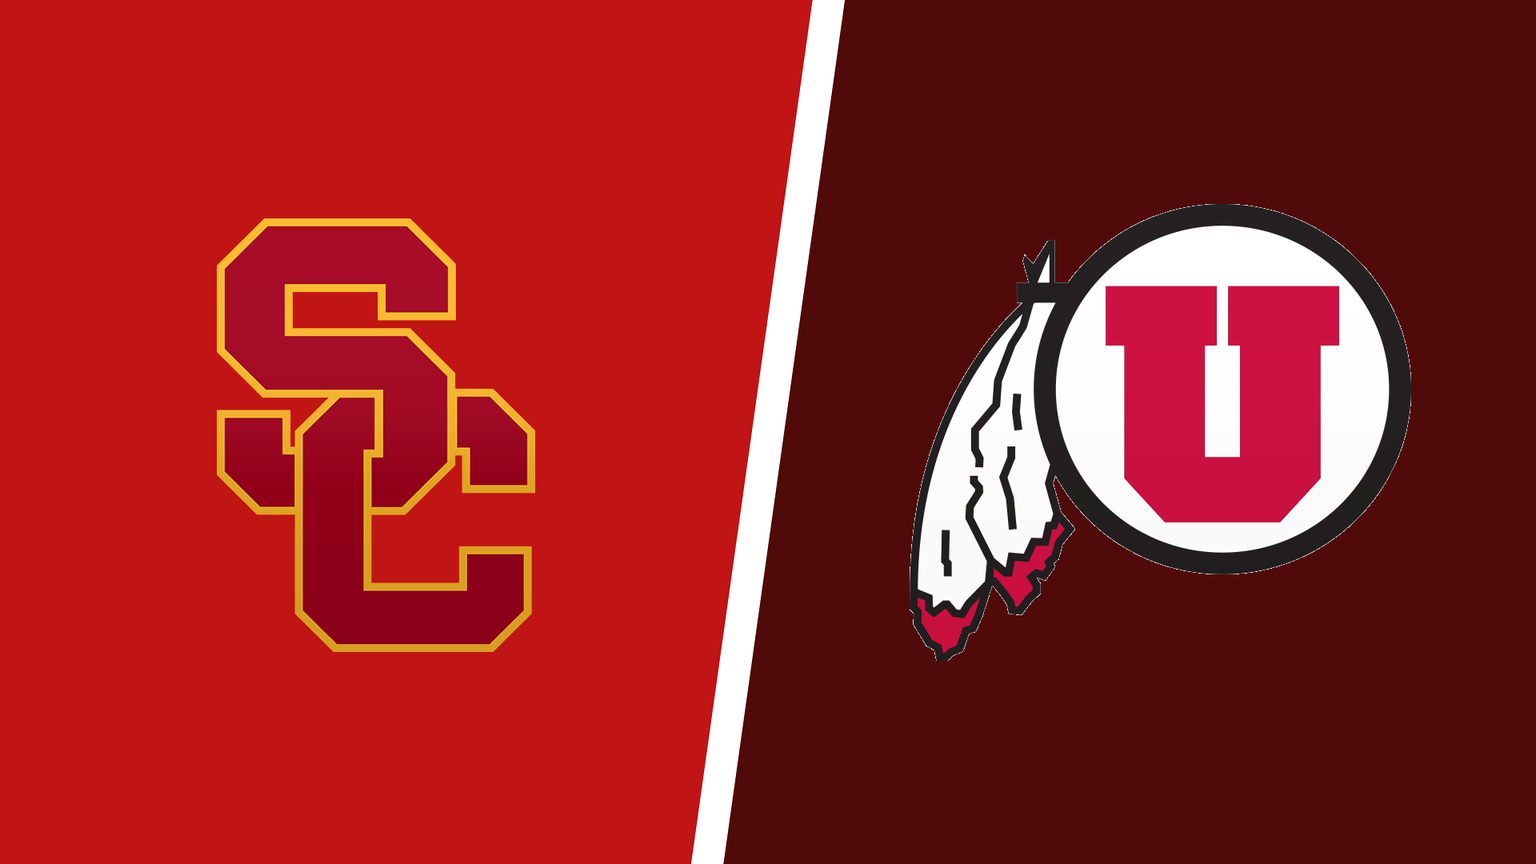 How to Watch Utah vs. USC Game Live Online on December 1, 2021